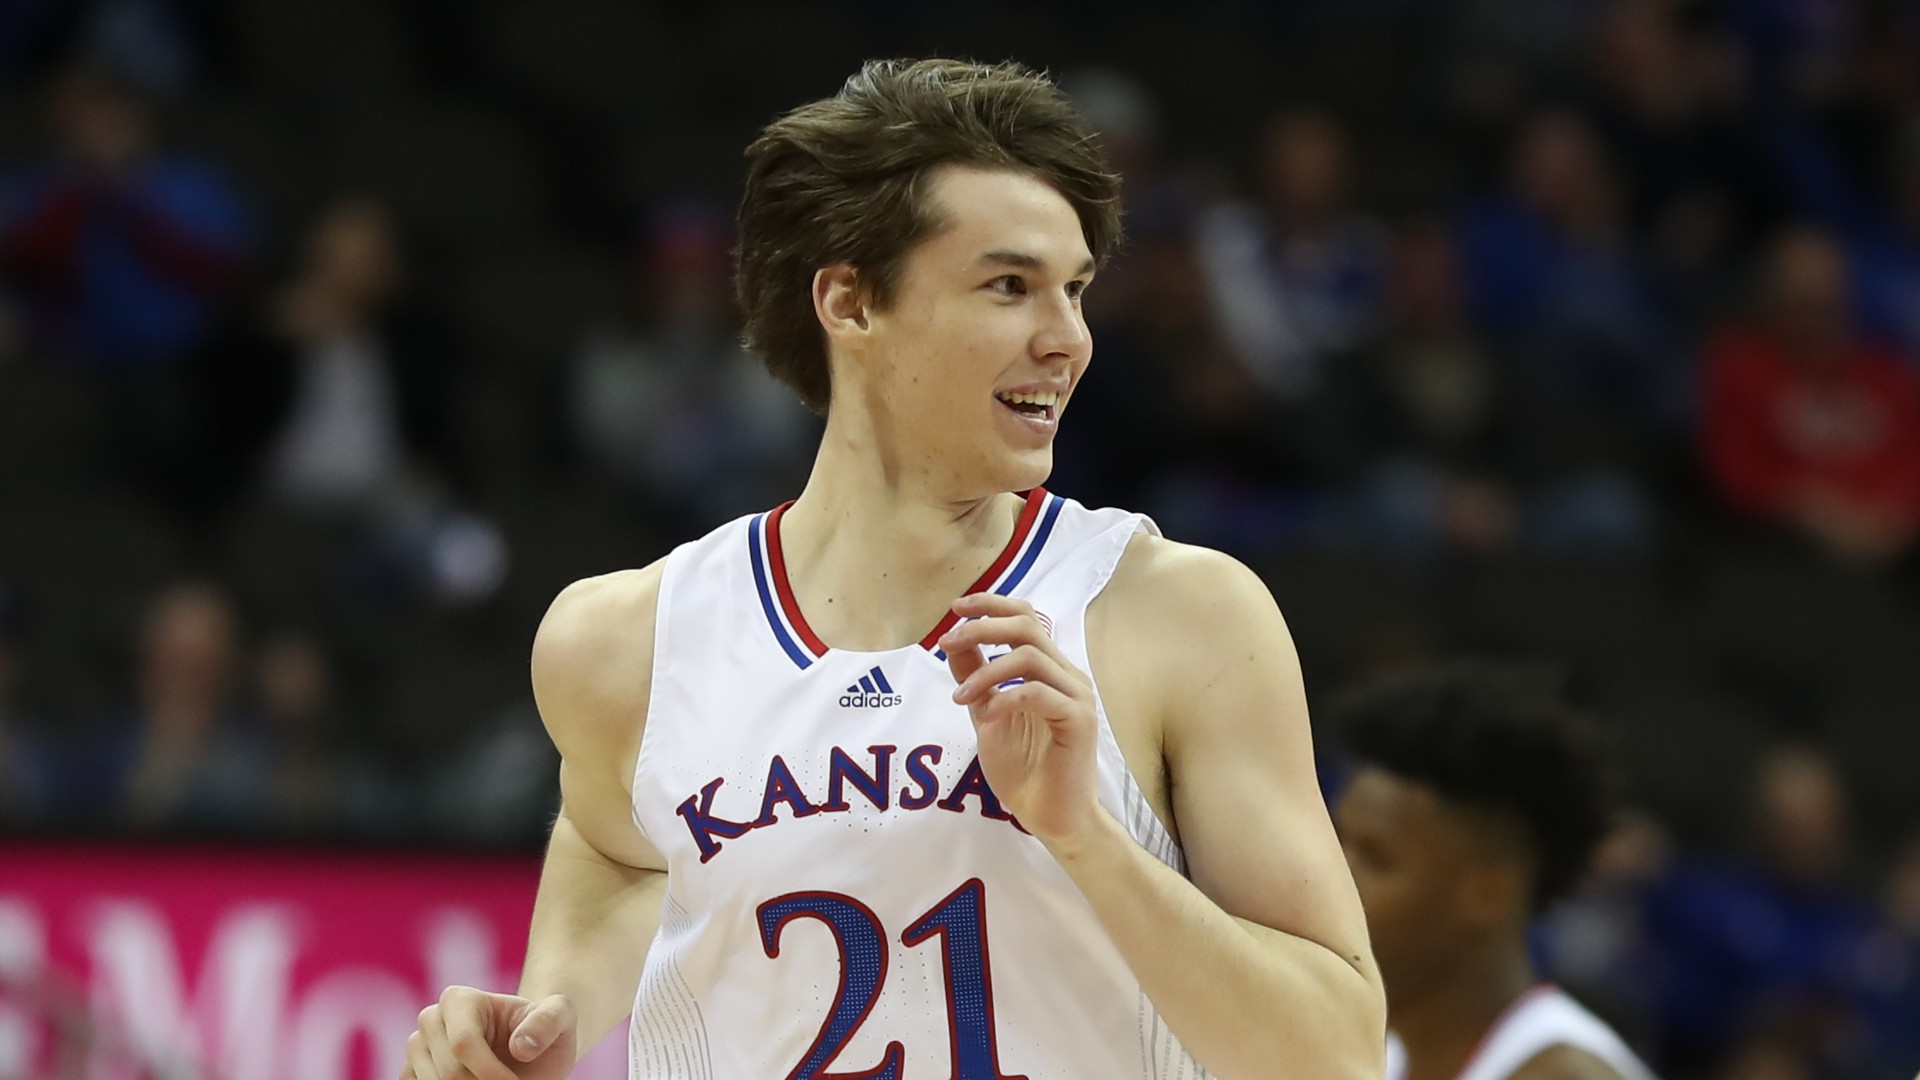 Texas Tech vs. Kansas Odds, Picks: Betting Value on Big 12 Tournament Over/Under (Saturday, March 12) article feature image